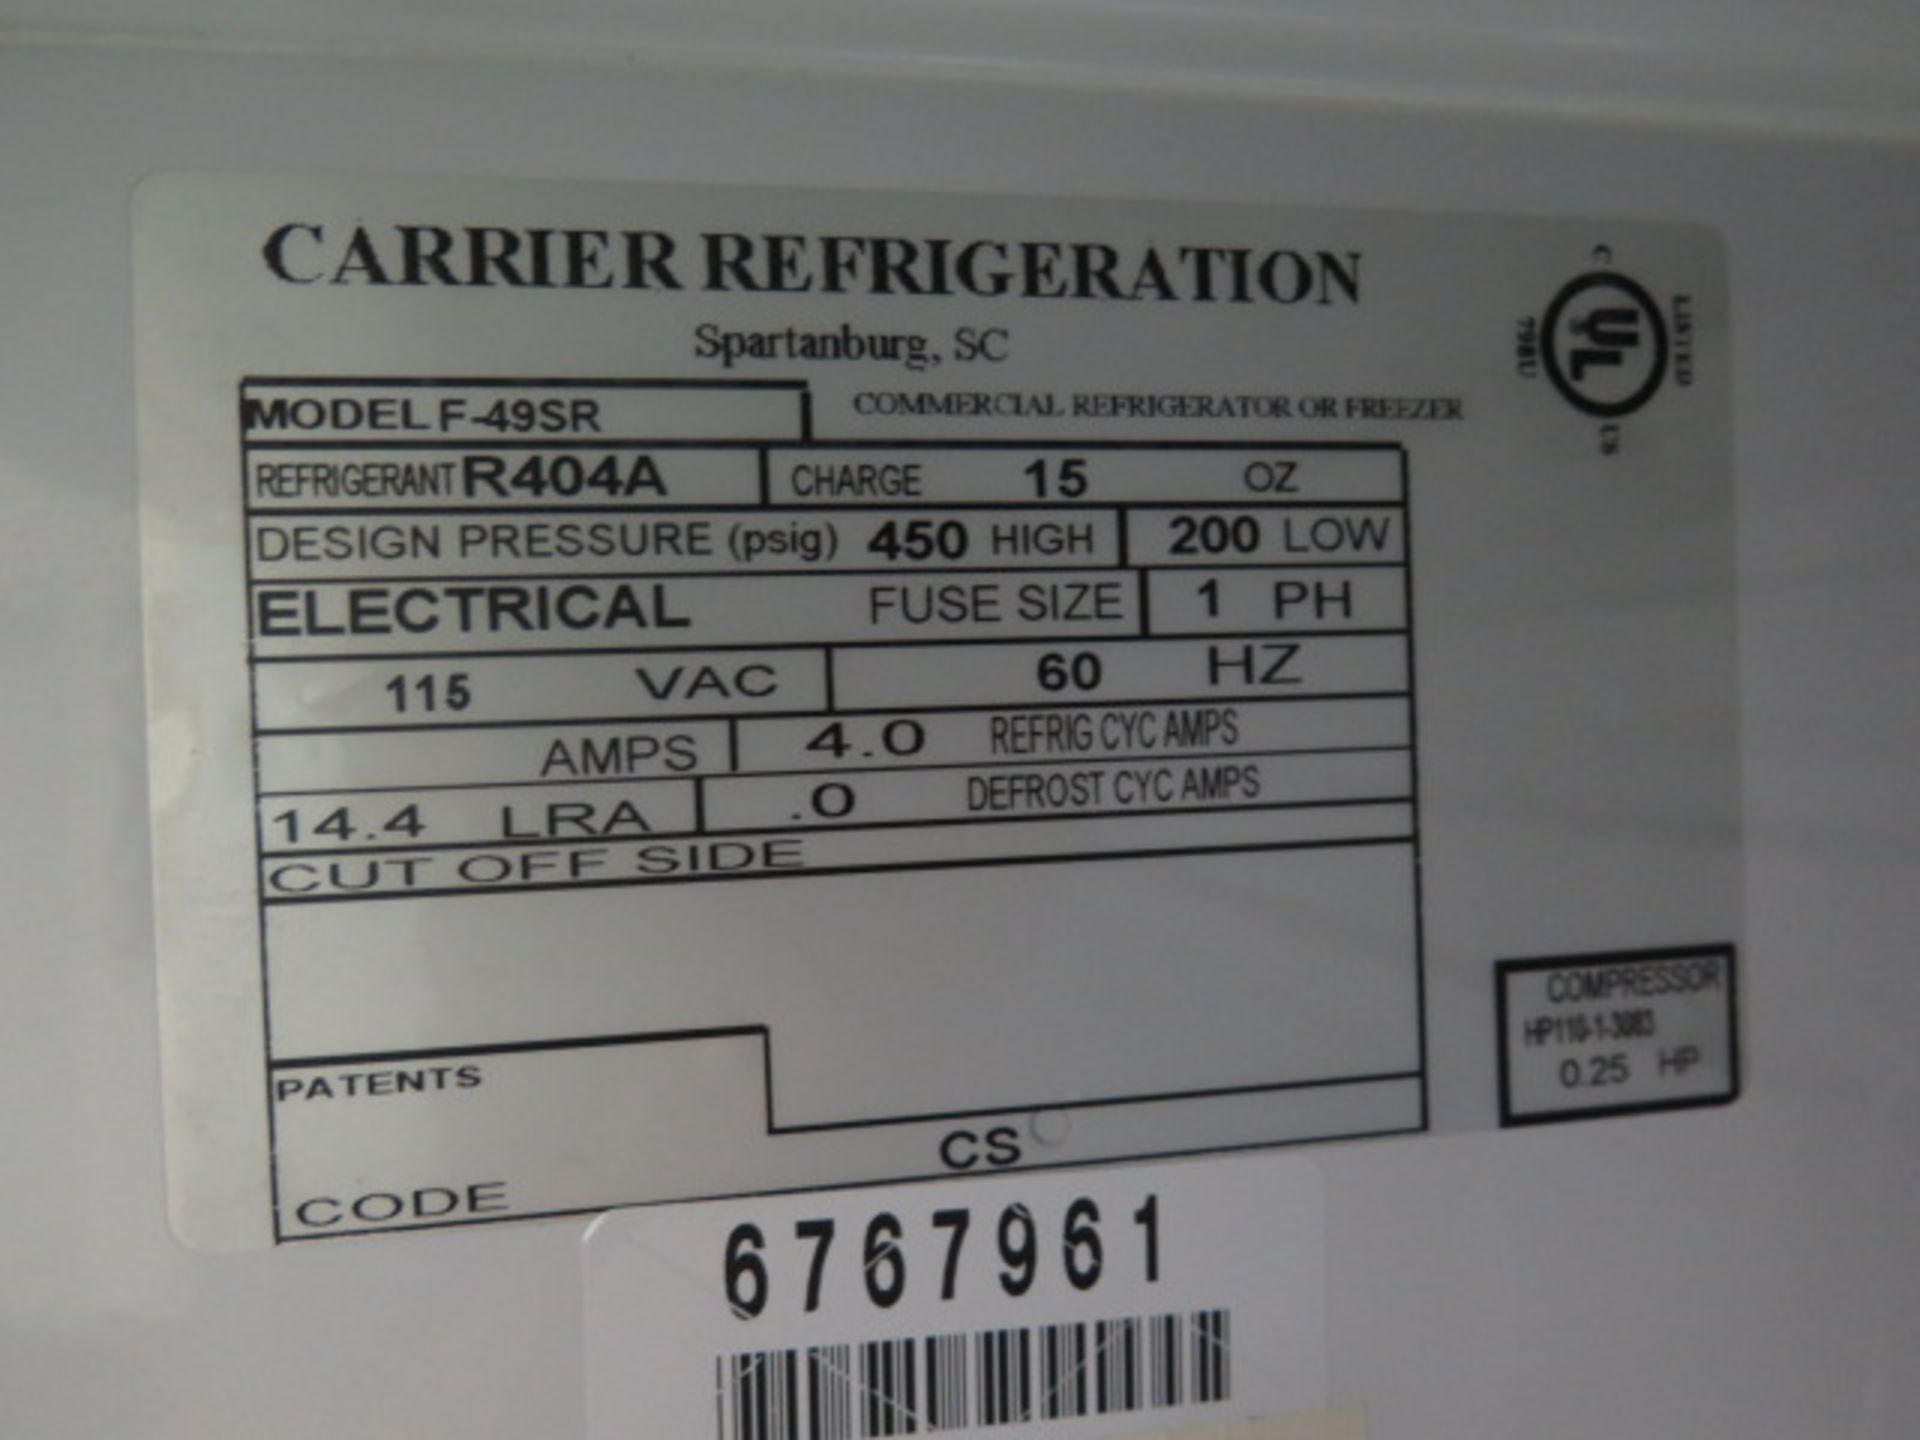 Carrier / ScienTemp mdl. F-49SR Flammable Material Storage Refrigerator s/n 6767961 (SOLD AS-IS - NO - Image 8 of 8